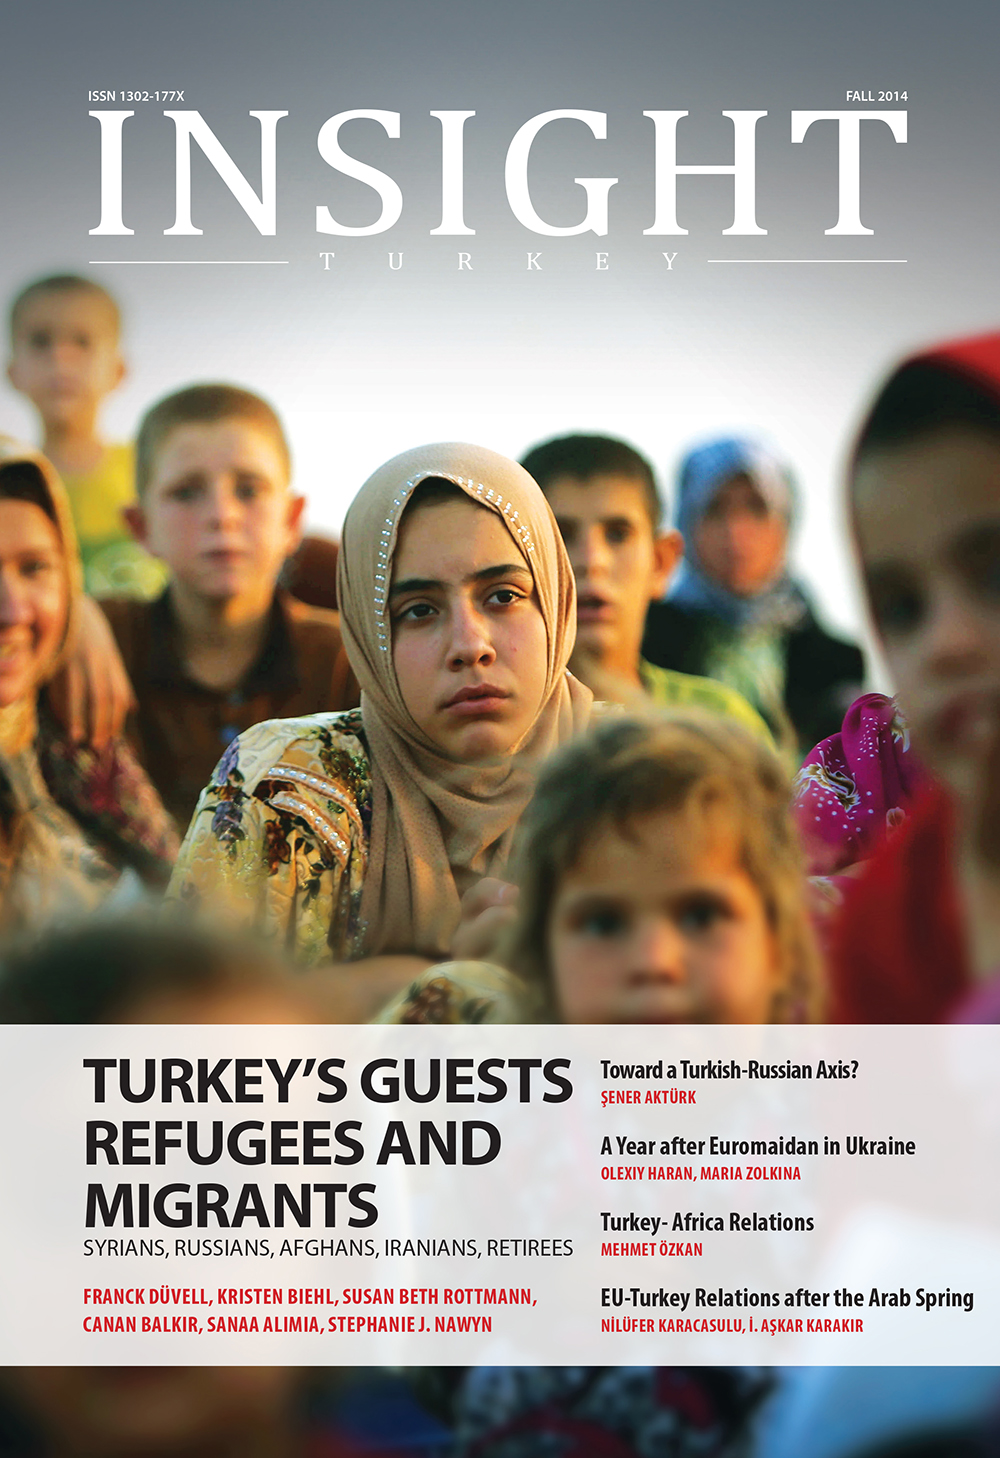 Turkey's Guests Refugees and Migrants